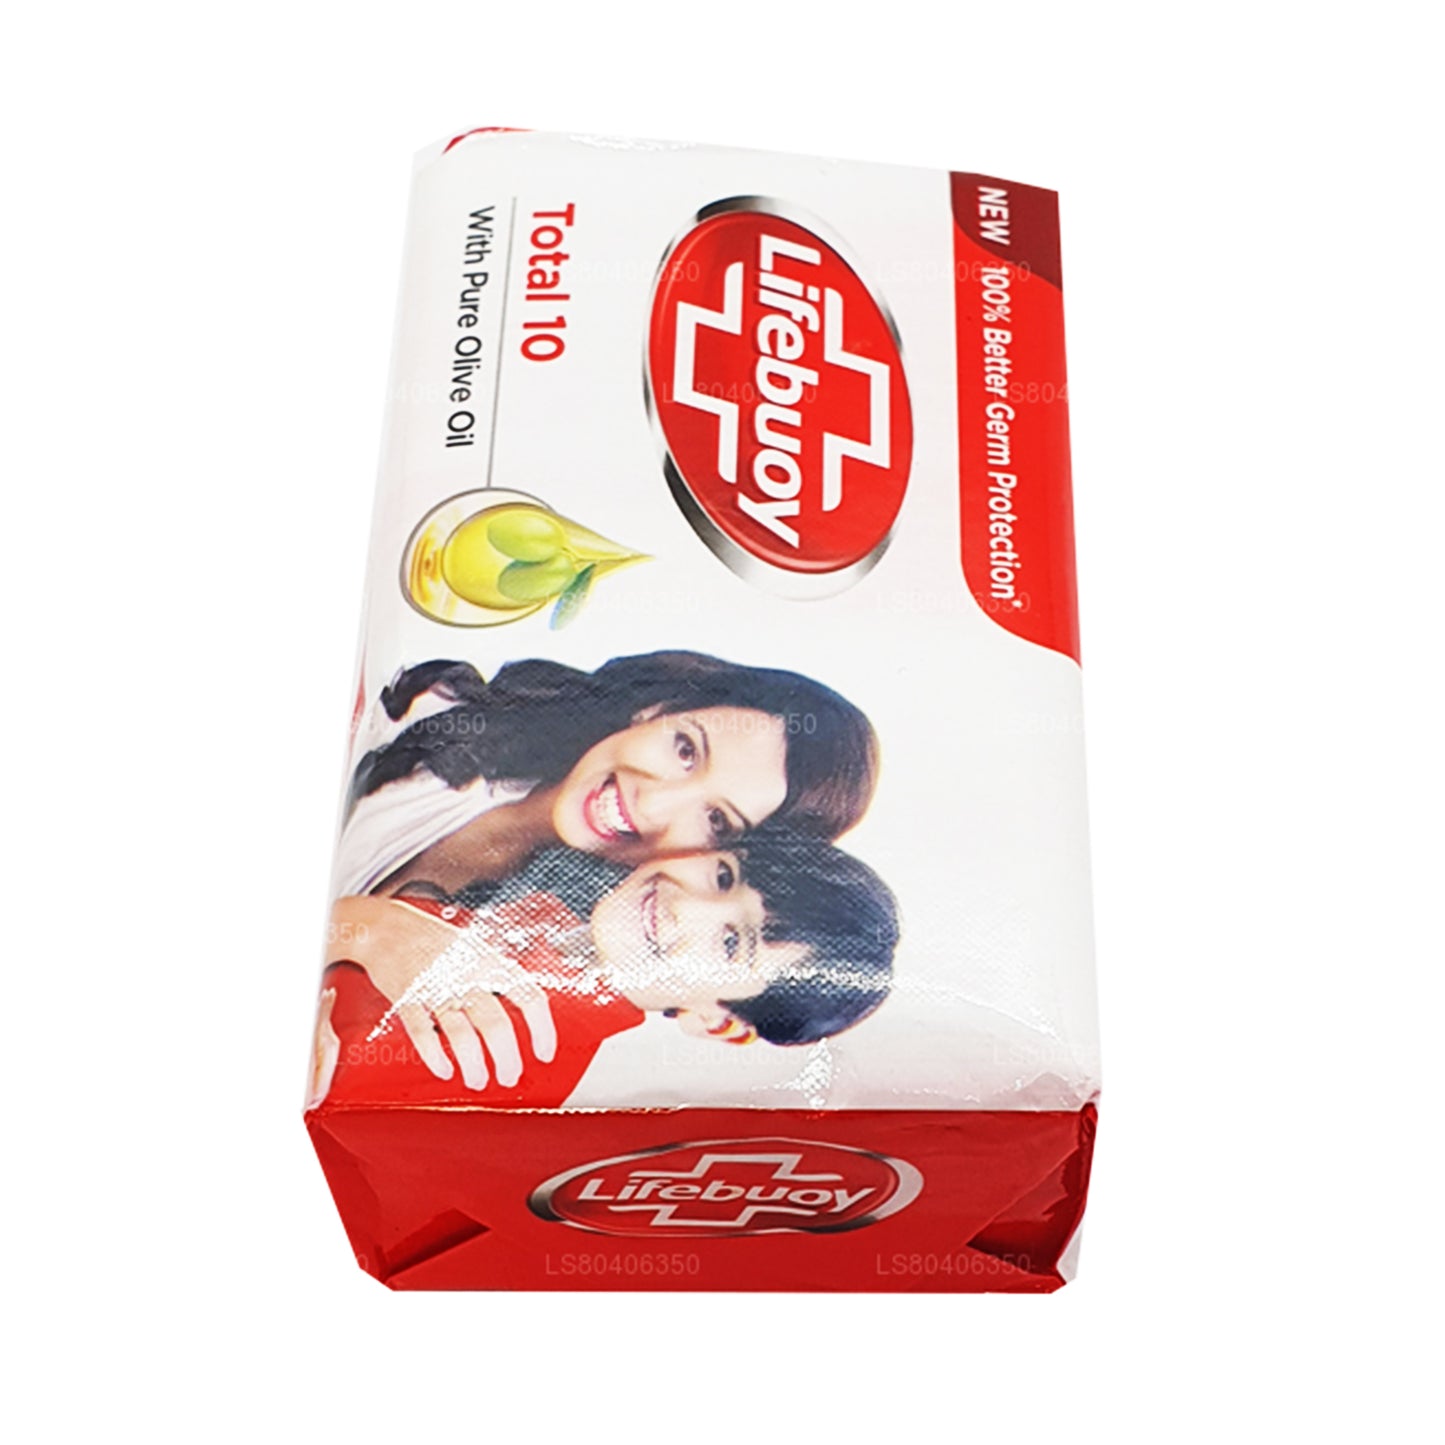 Lifebuoy Total 10 With Pure Olive Oil Body Soap (100g)